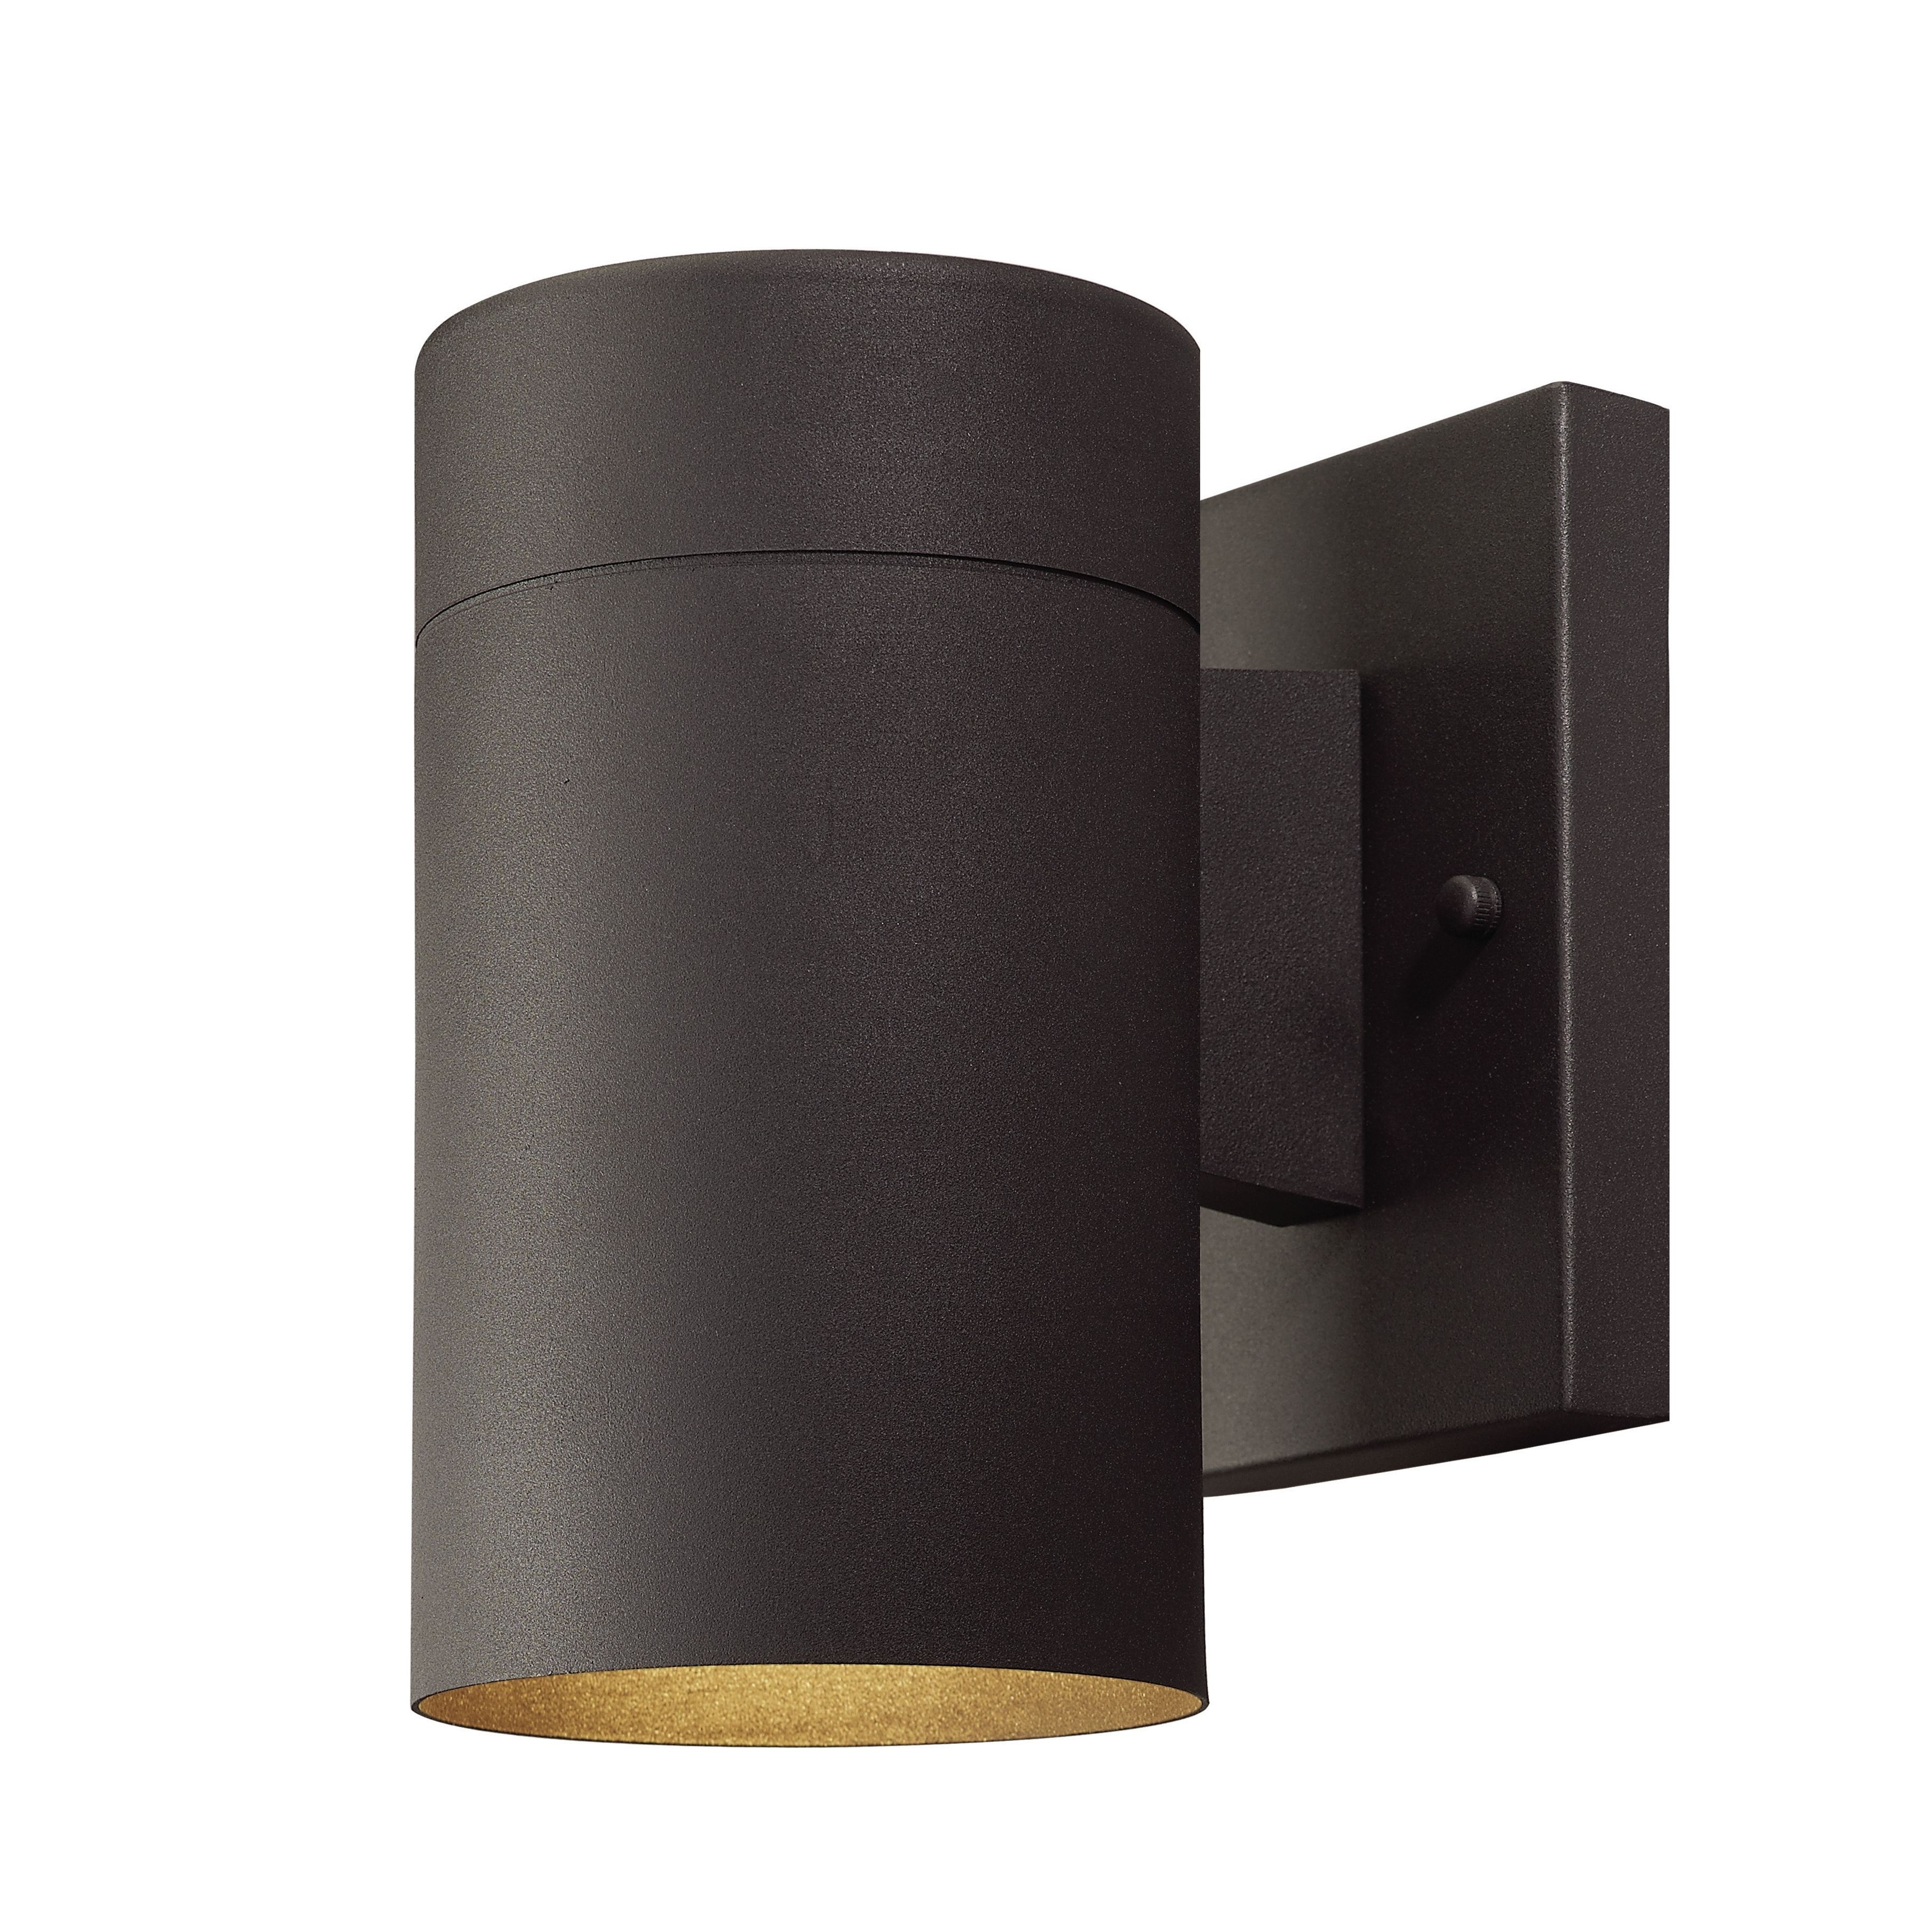 Fashionable Outdoor Wall Lighting Wayfair 1 Light Sconce ~ Loversiq With Regard To Japanese Outdoor Wall Lighting (View 18 of 20)